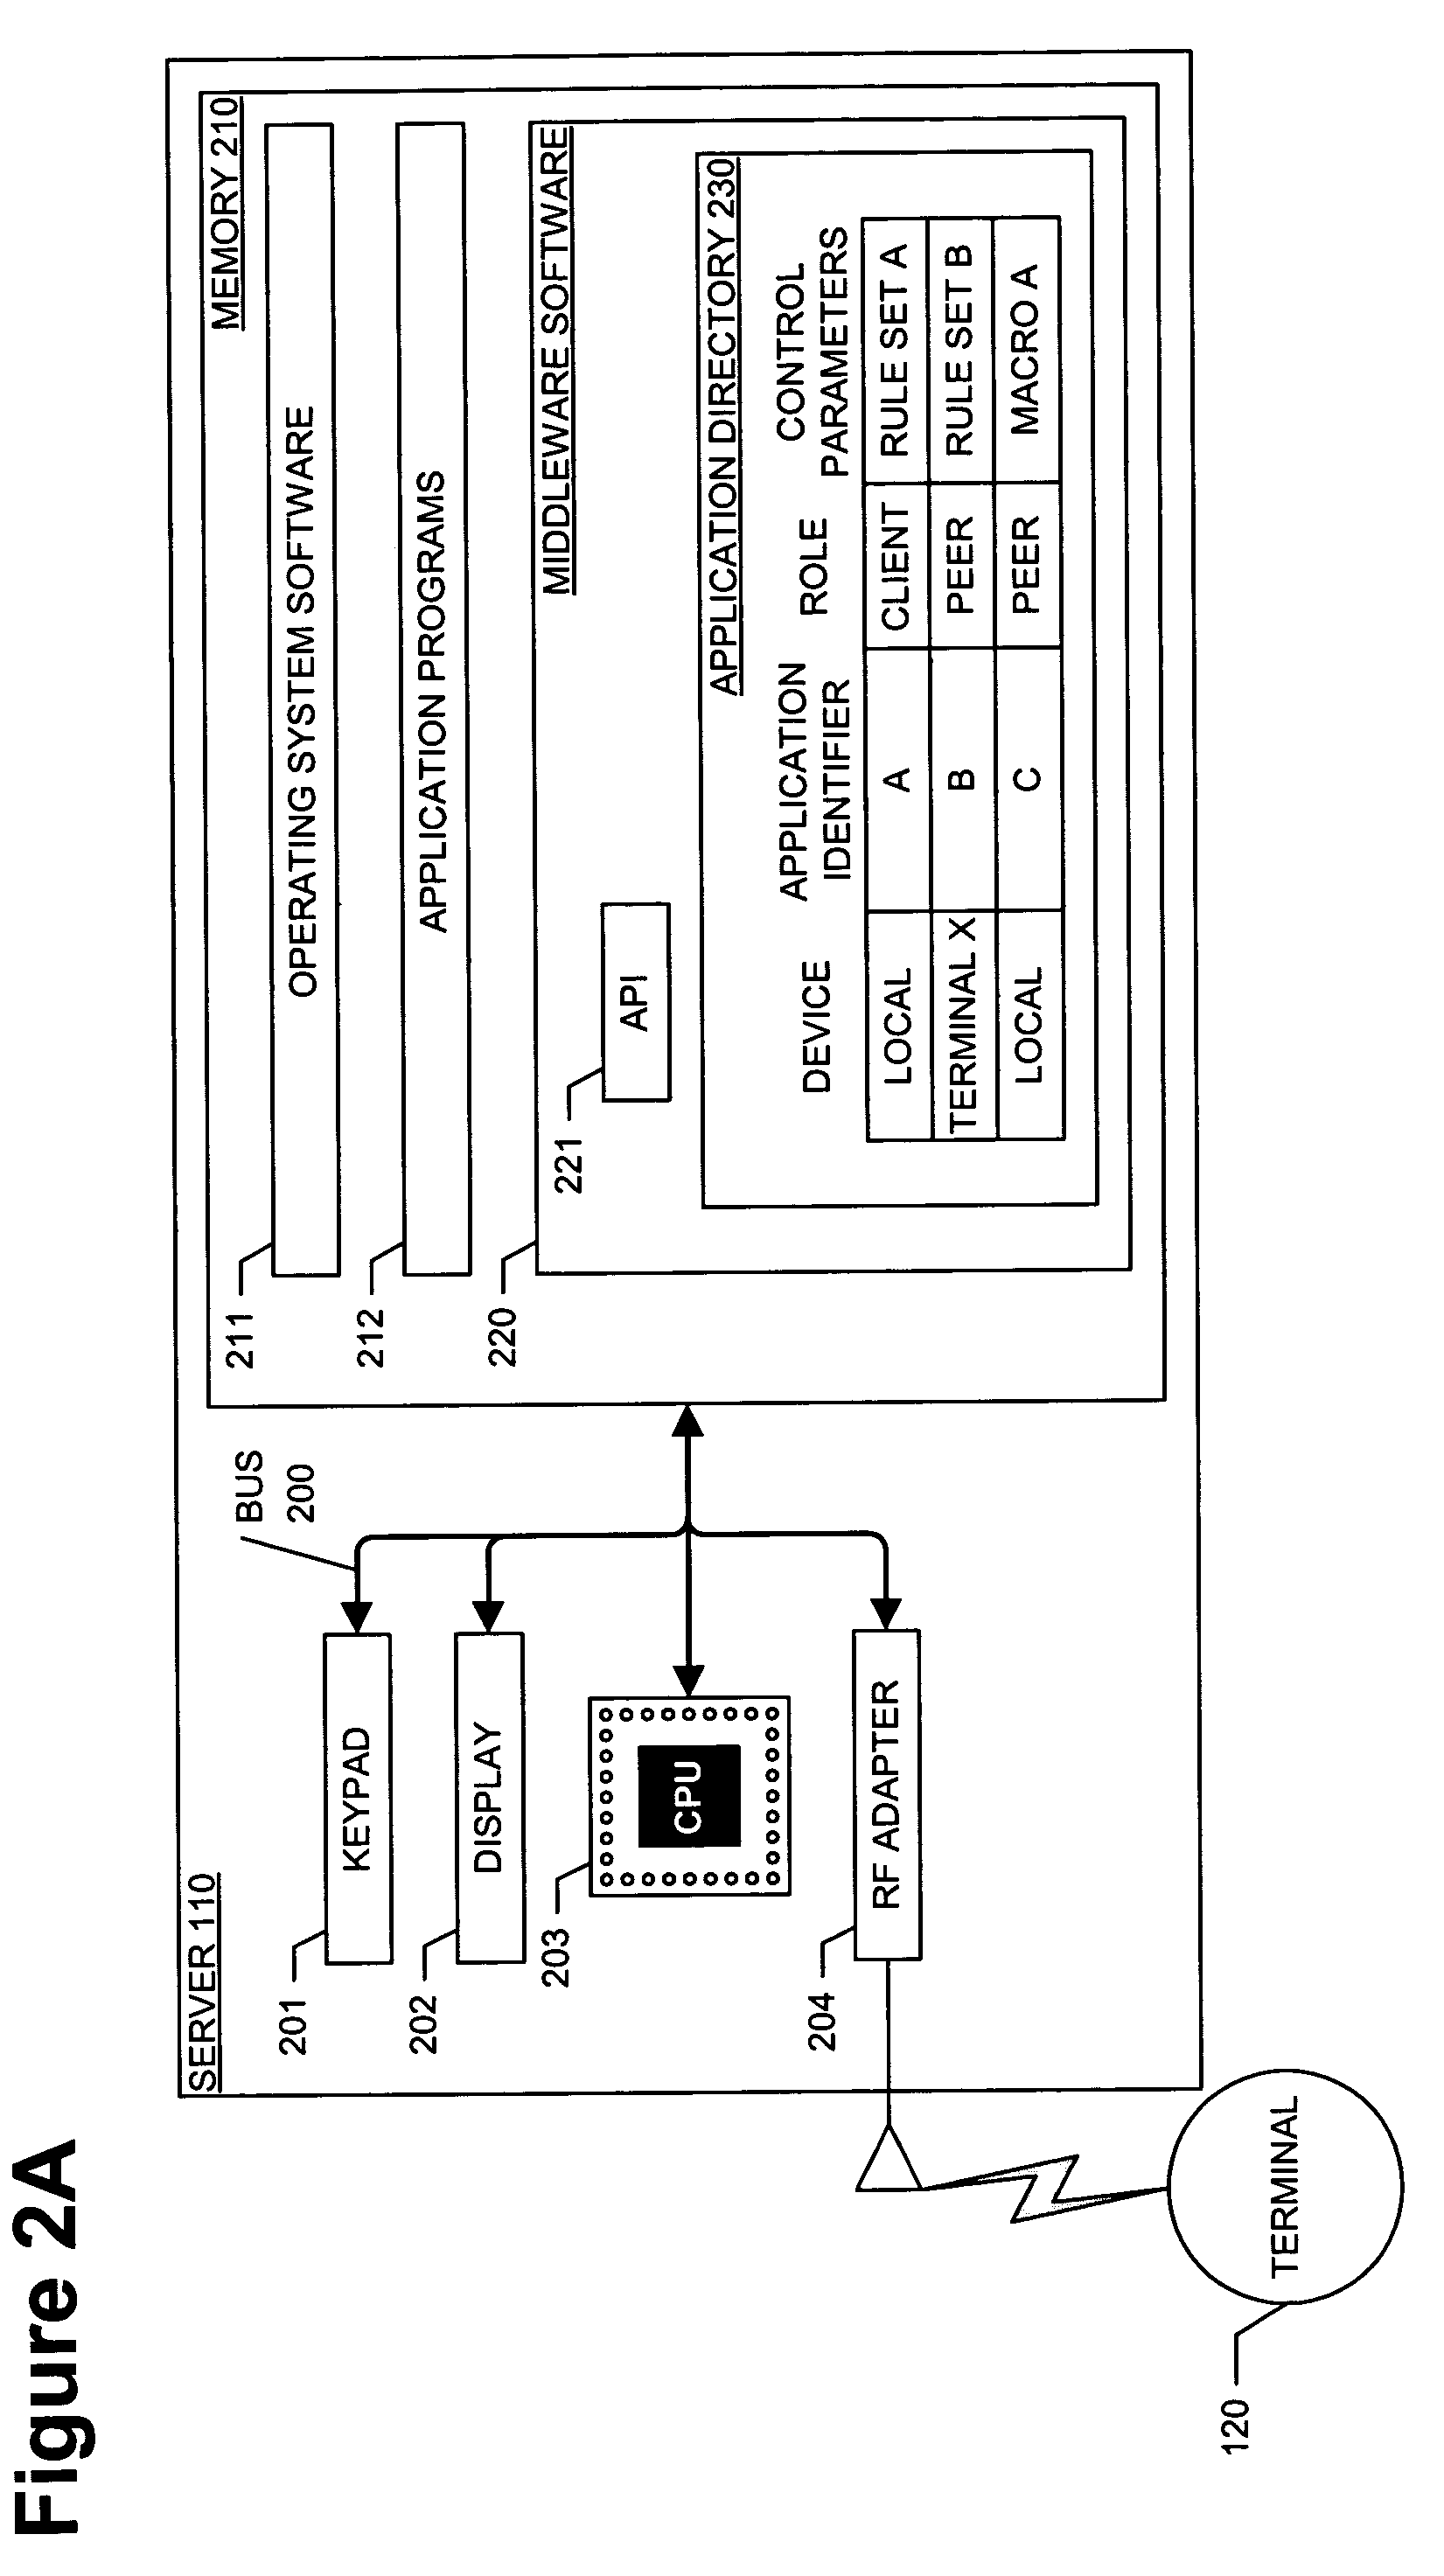 Application control in peer-to-peer ad-hoc communication networks